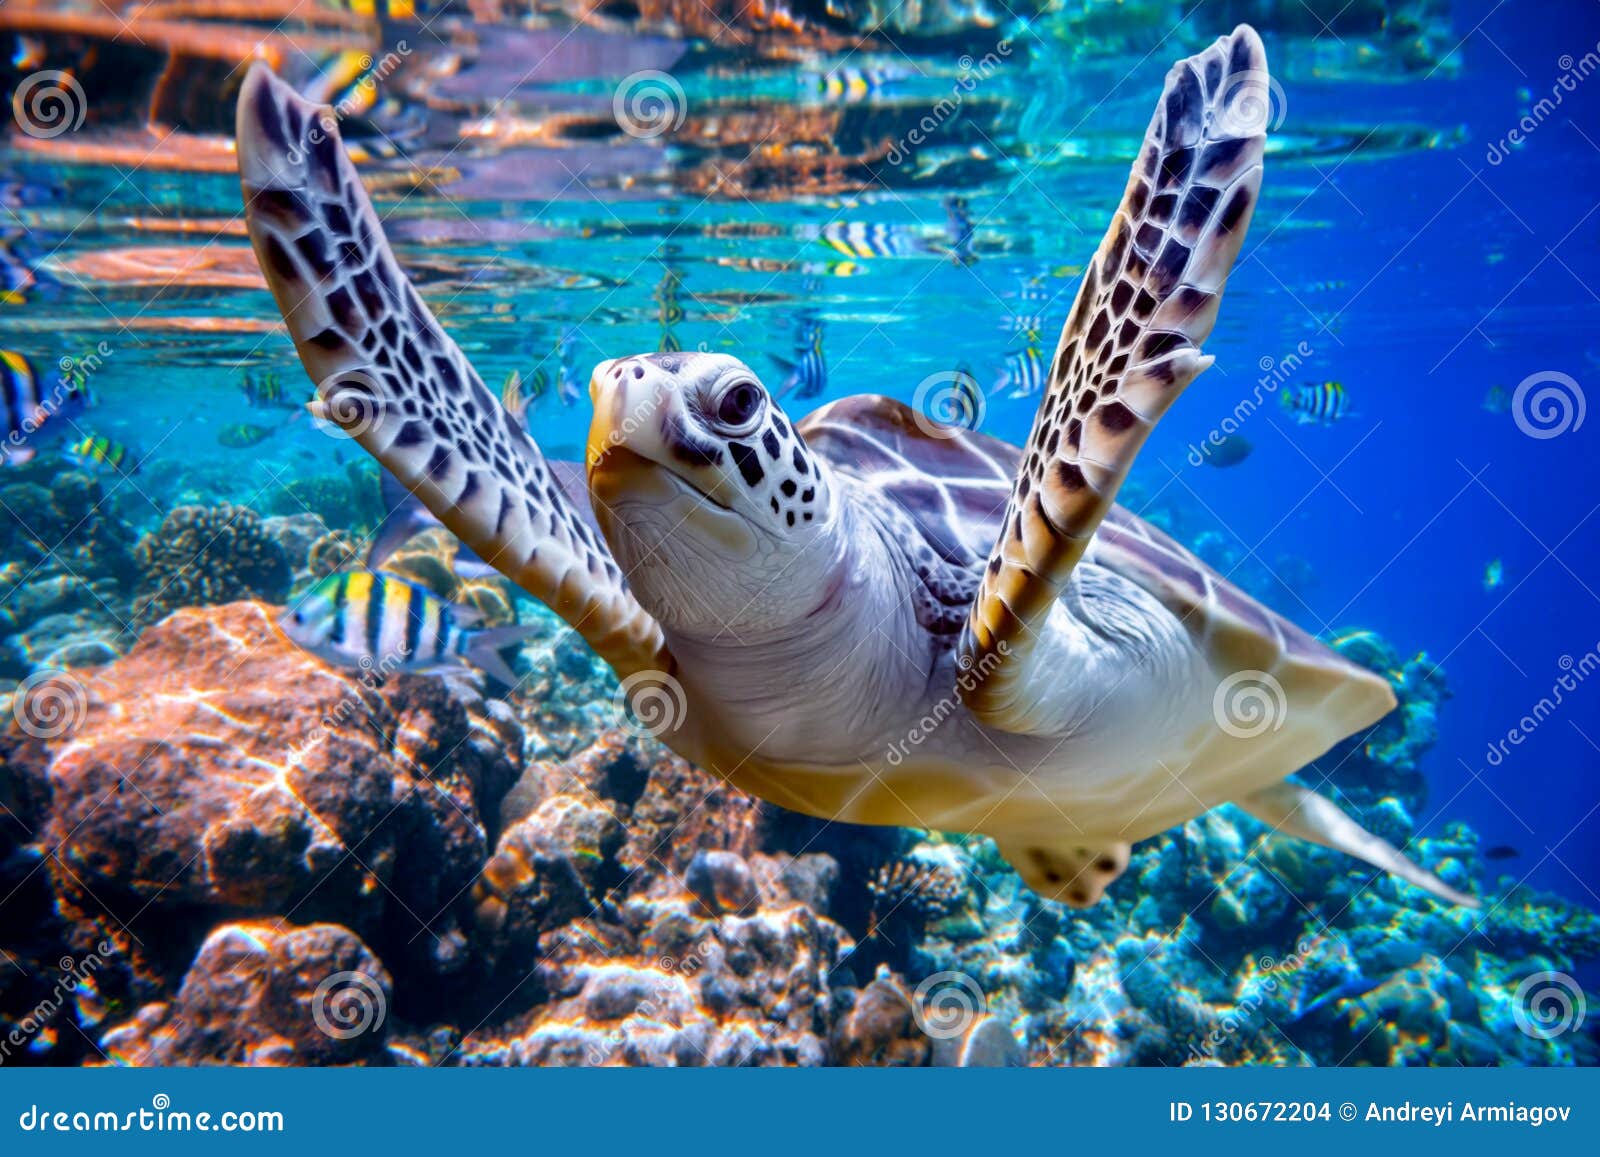 Sea Turtle Swims Under Water on the Background of Coral Reefs 